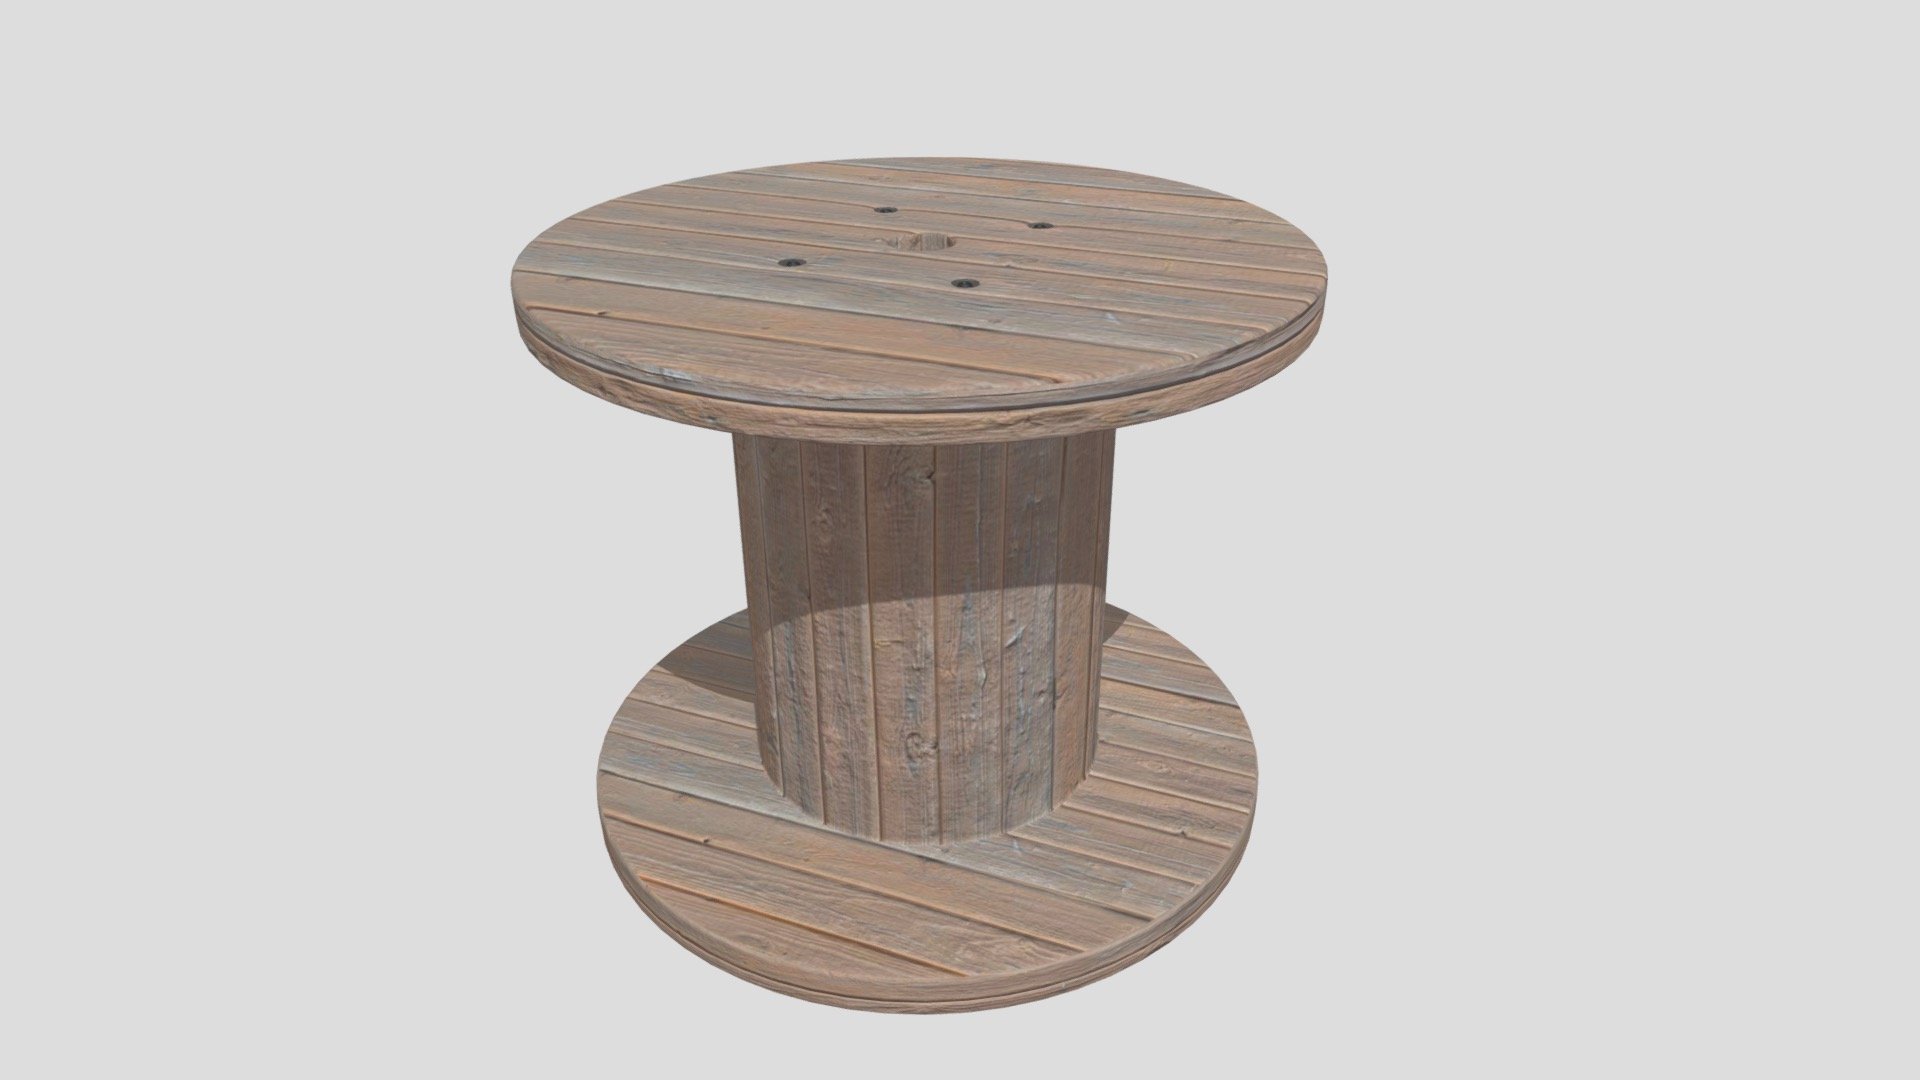 Cable reel, 3D CAD Model Library